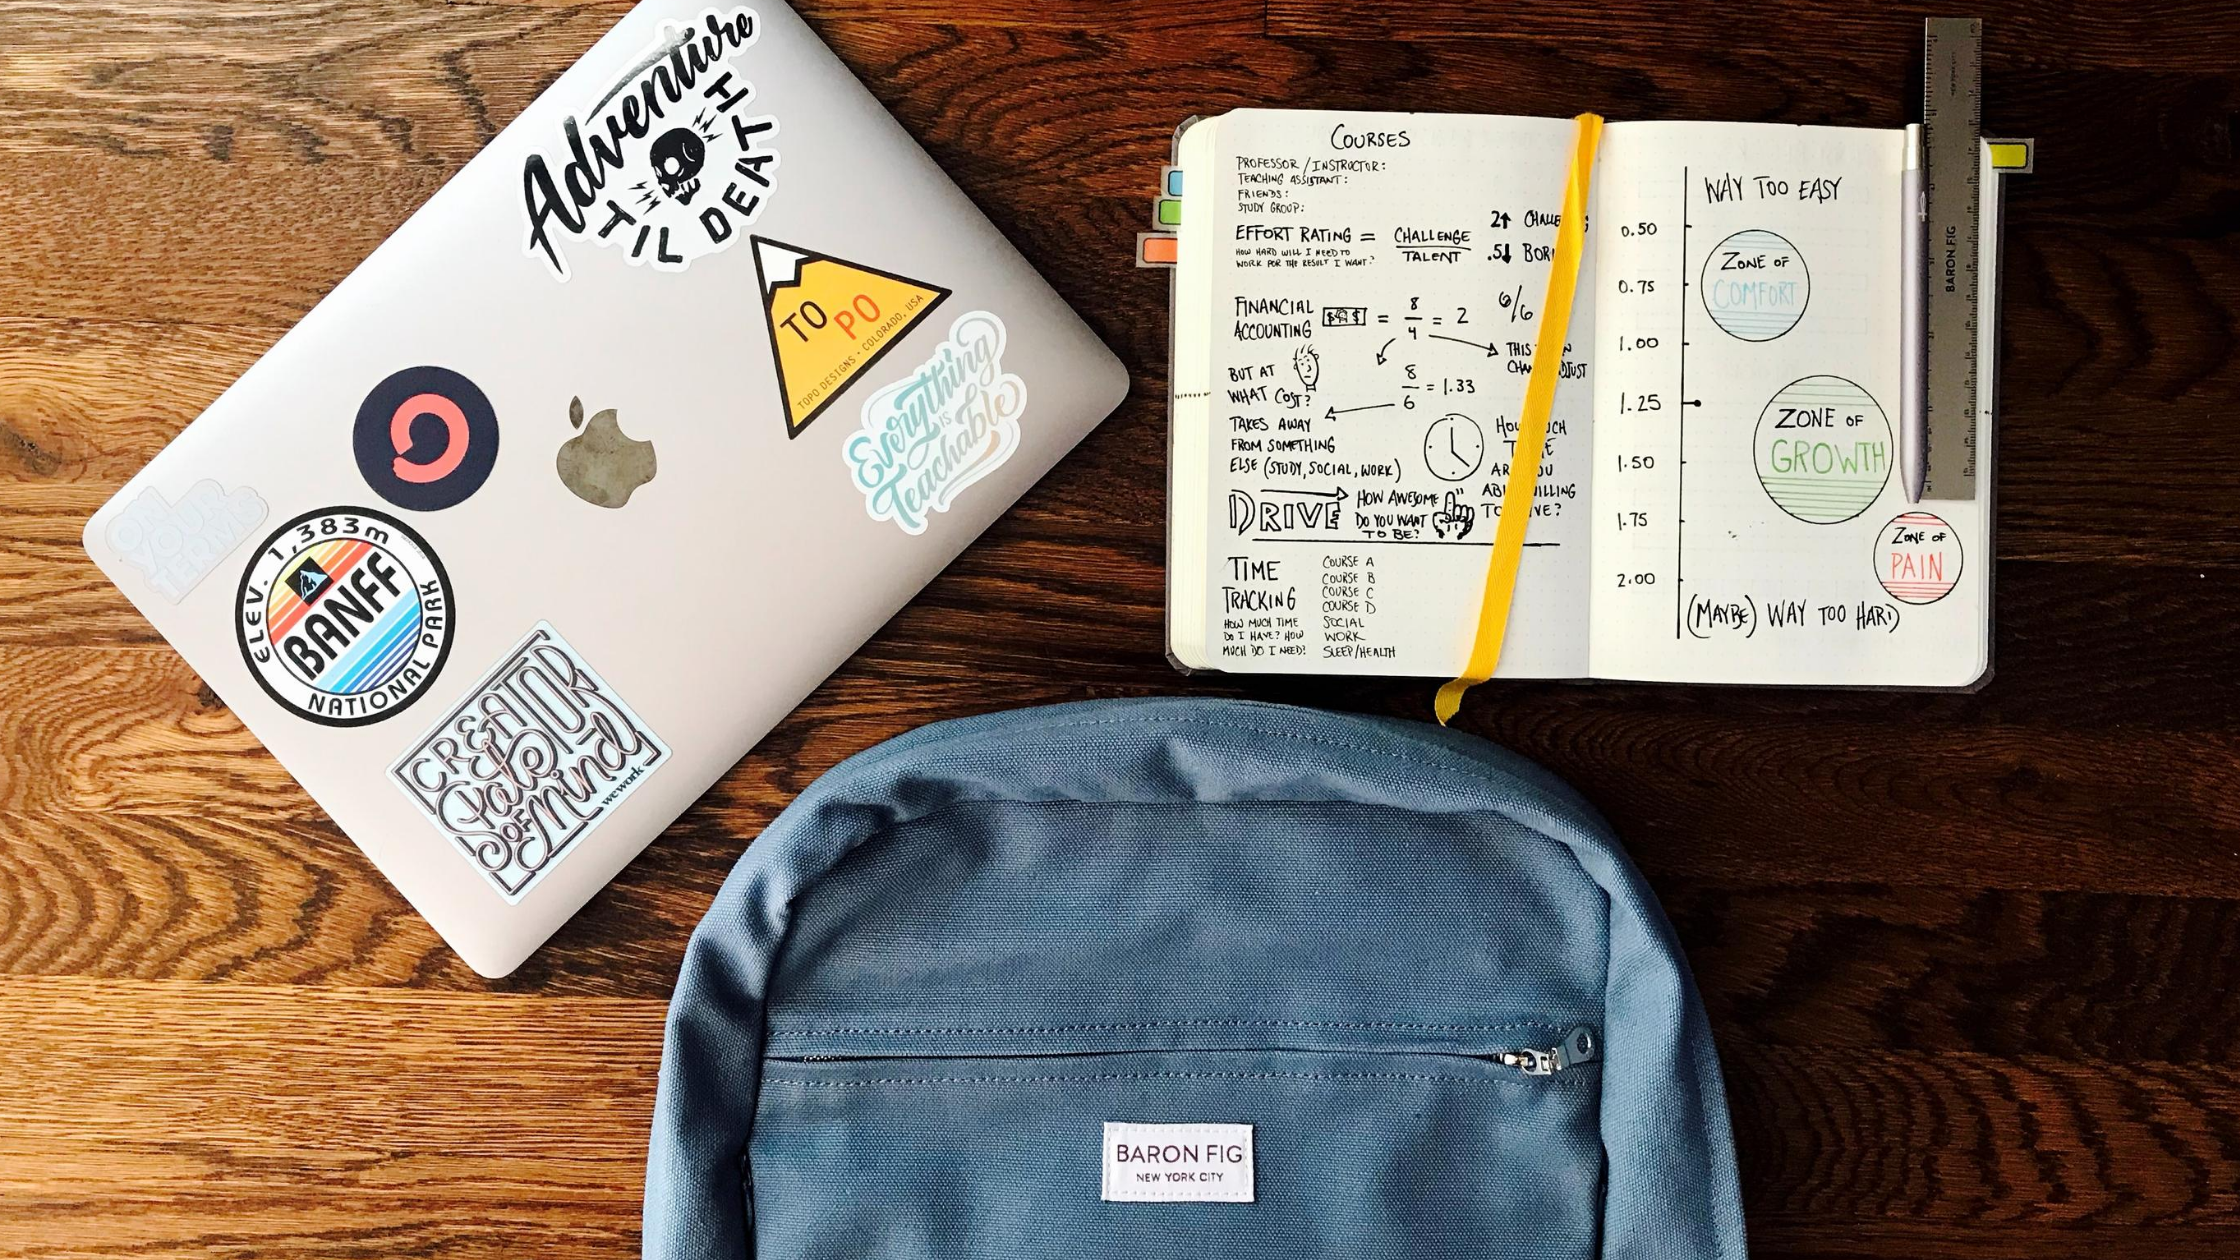 16 Tips For Back To School Shopping